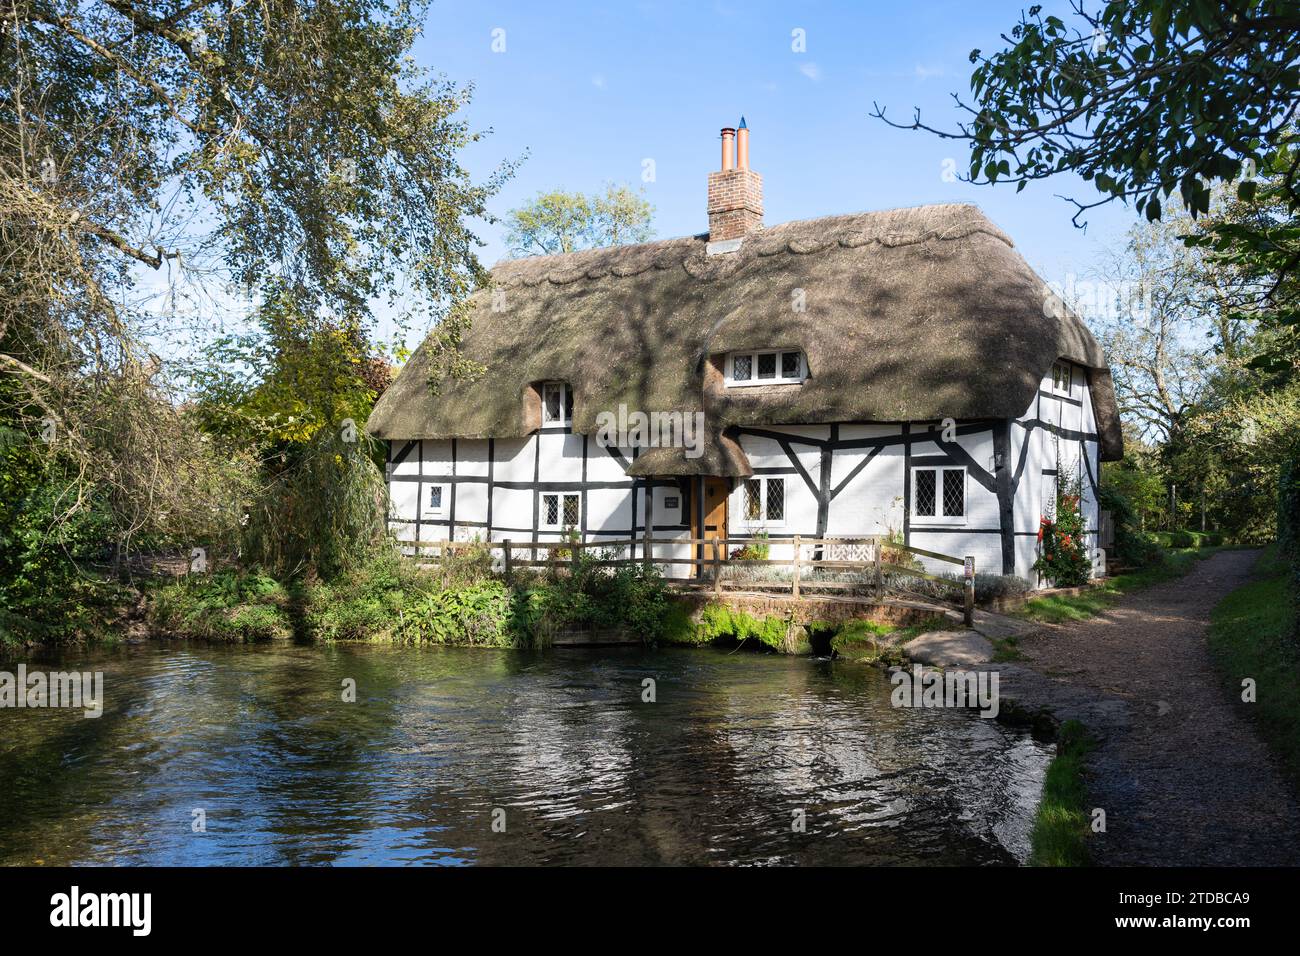 Grade II listed 17th century Fulling Mill on the river Alre in New Alresford, formerly used for the fulling of sheep's wool cloth. Hampshire, UK Stock Photo